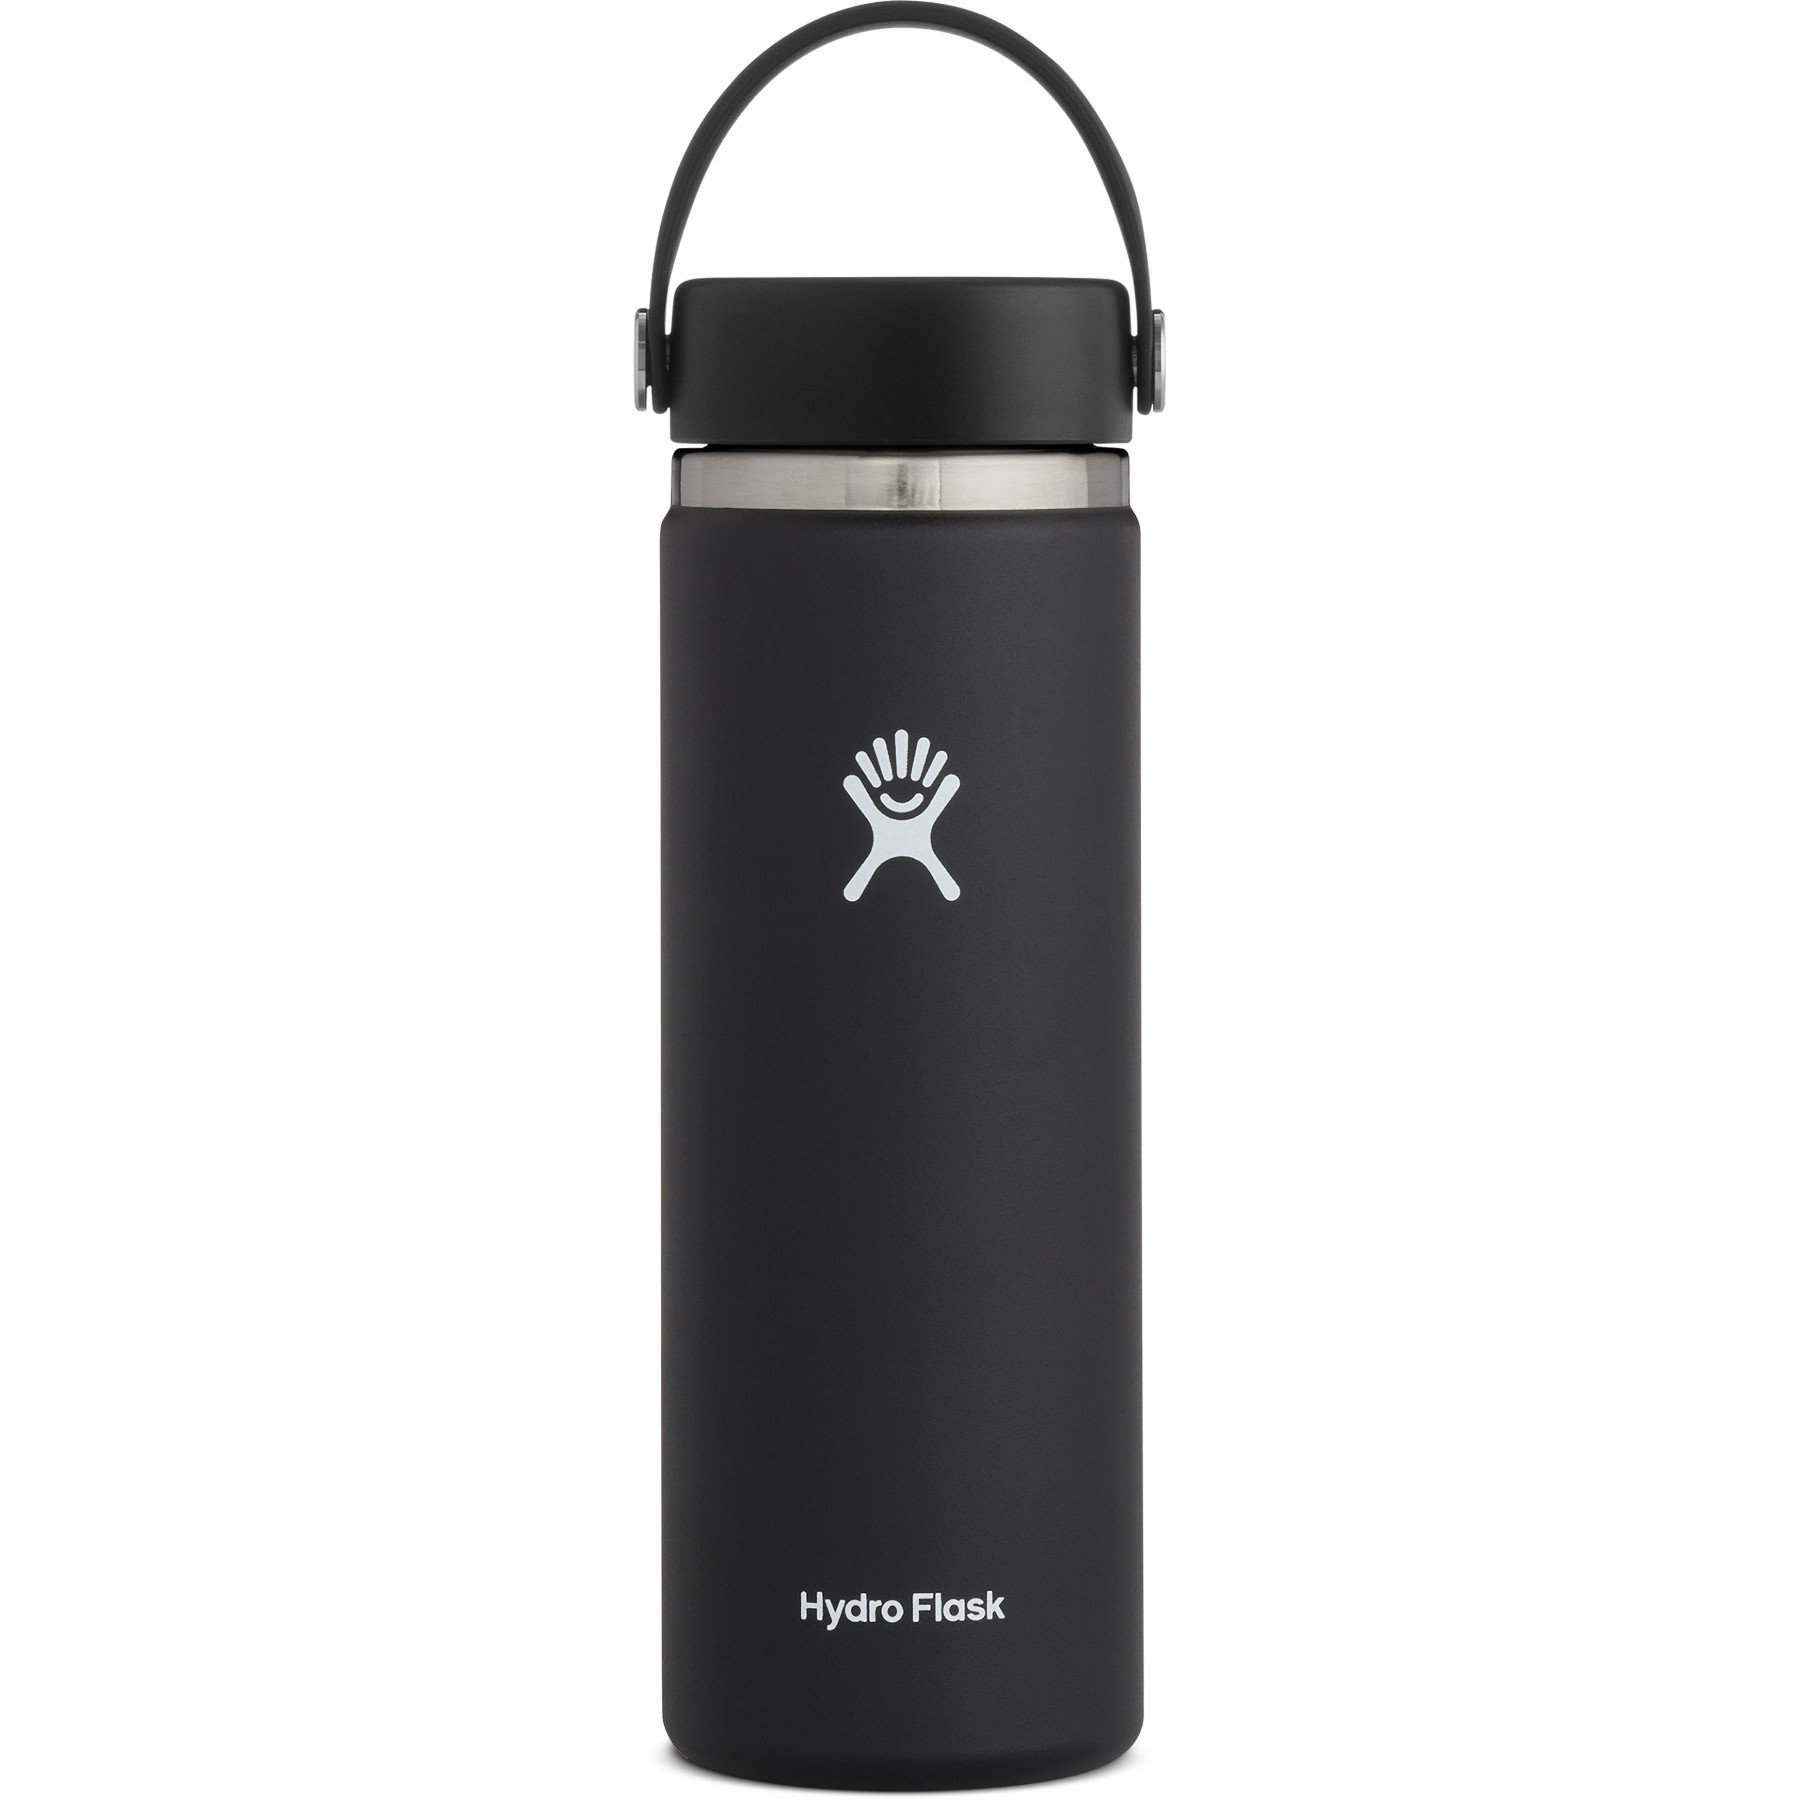 Image of Hydro Flask 20 oz Wide Mouth Insulated Bottle + Flex Cap - 591ml - Black